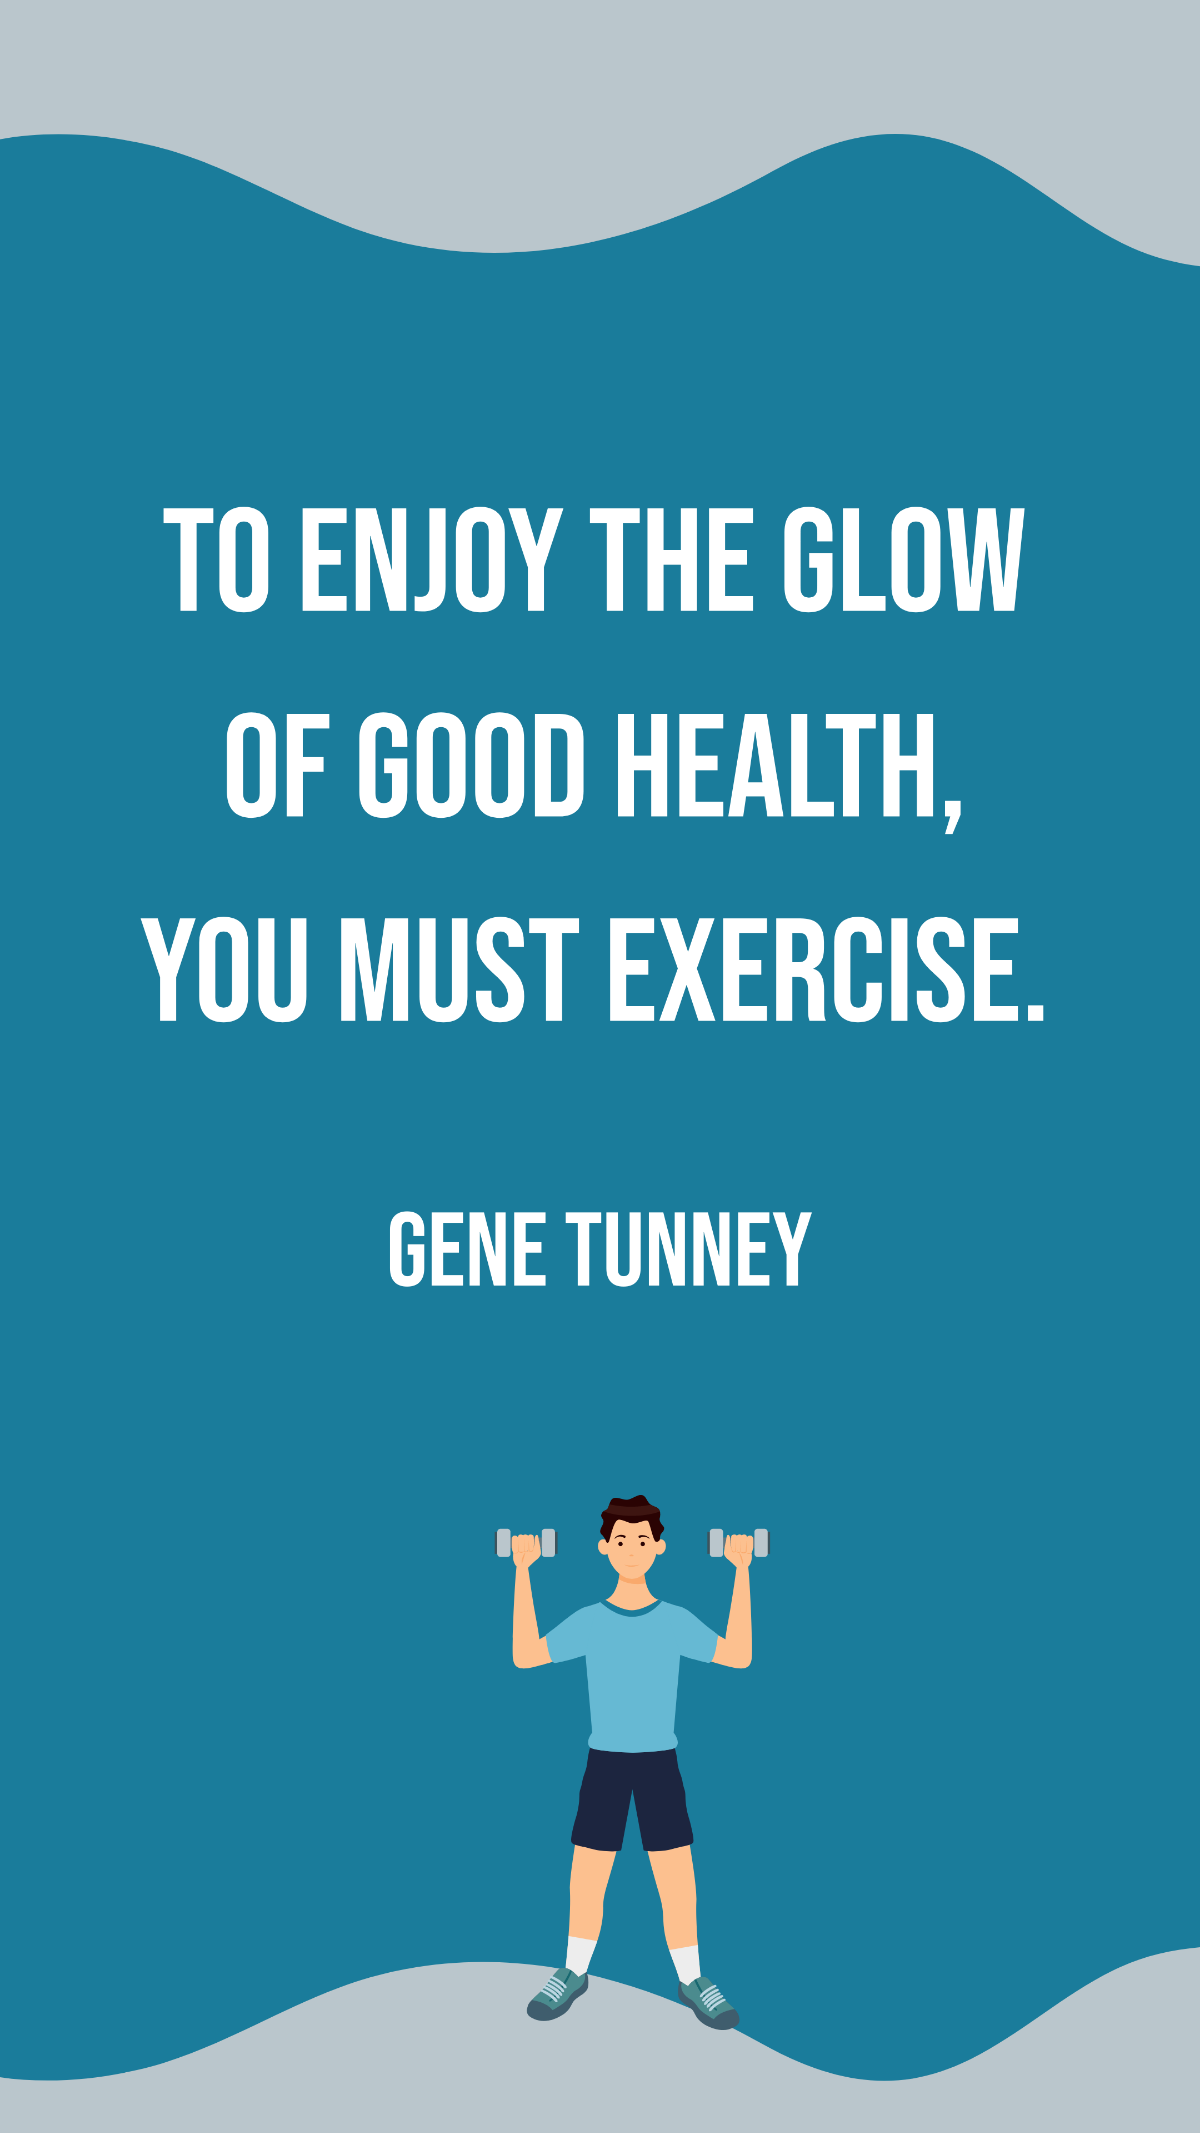 Gene Tunney - To enjoy the glow of good health, you must exercise. Template